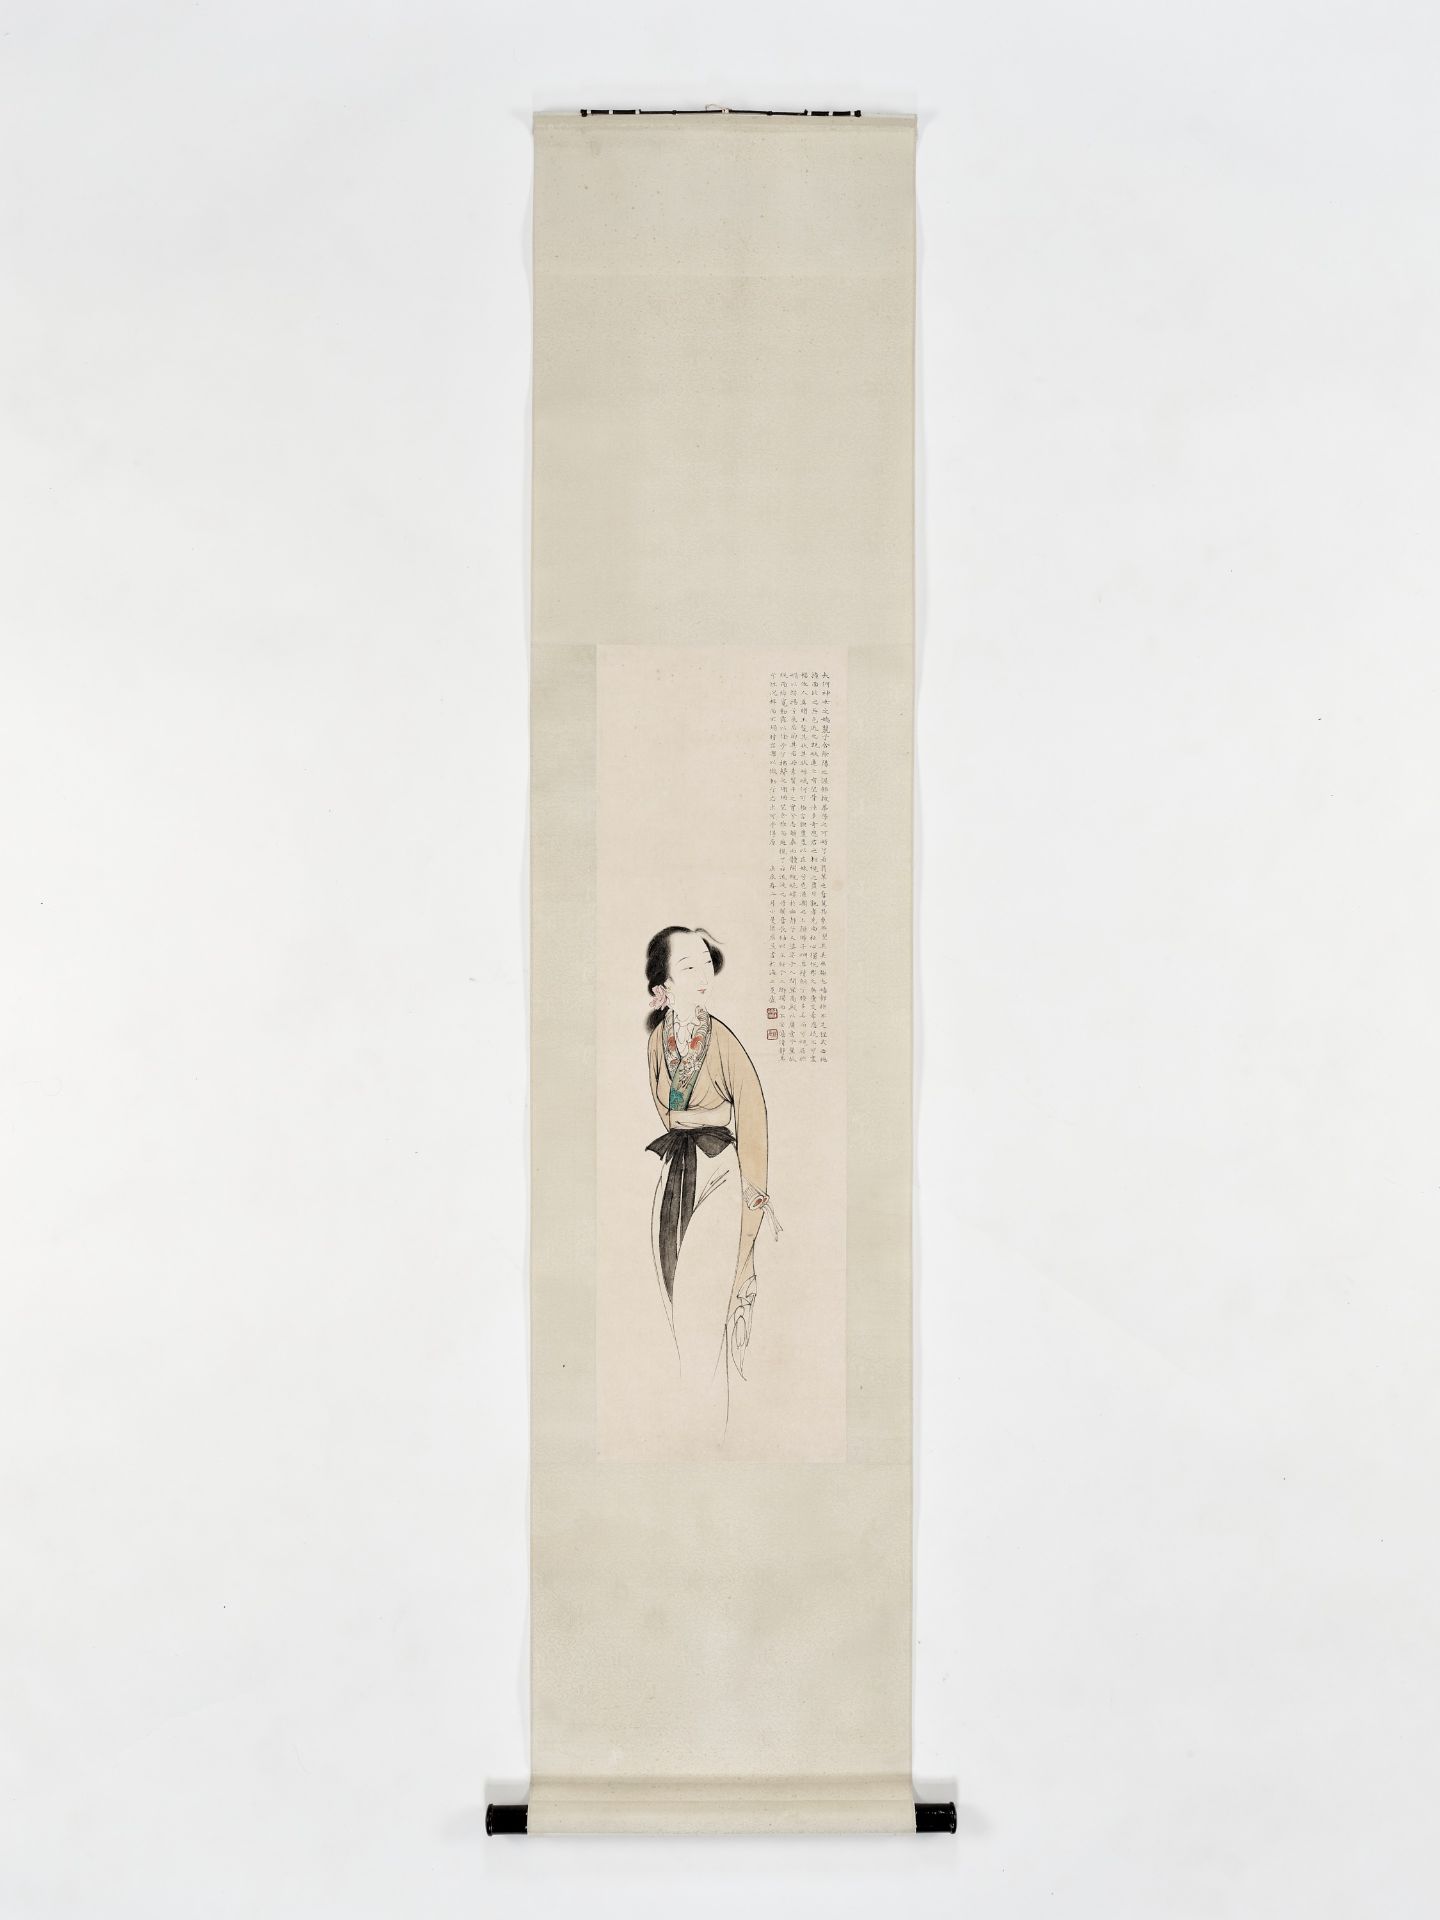 RHAPSODY ON THE GODDESS' BY LU XIAOMAN, DATED 1940 - Image 8 of 9